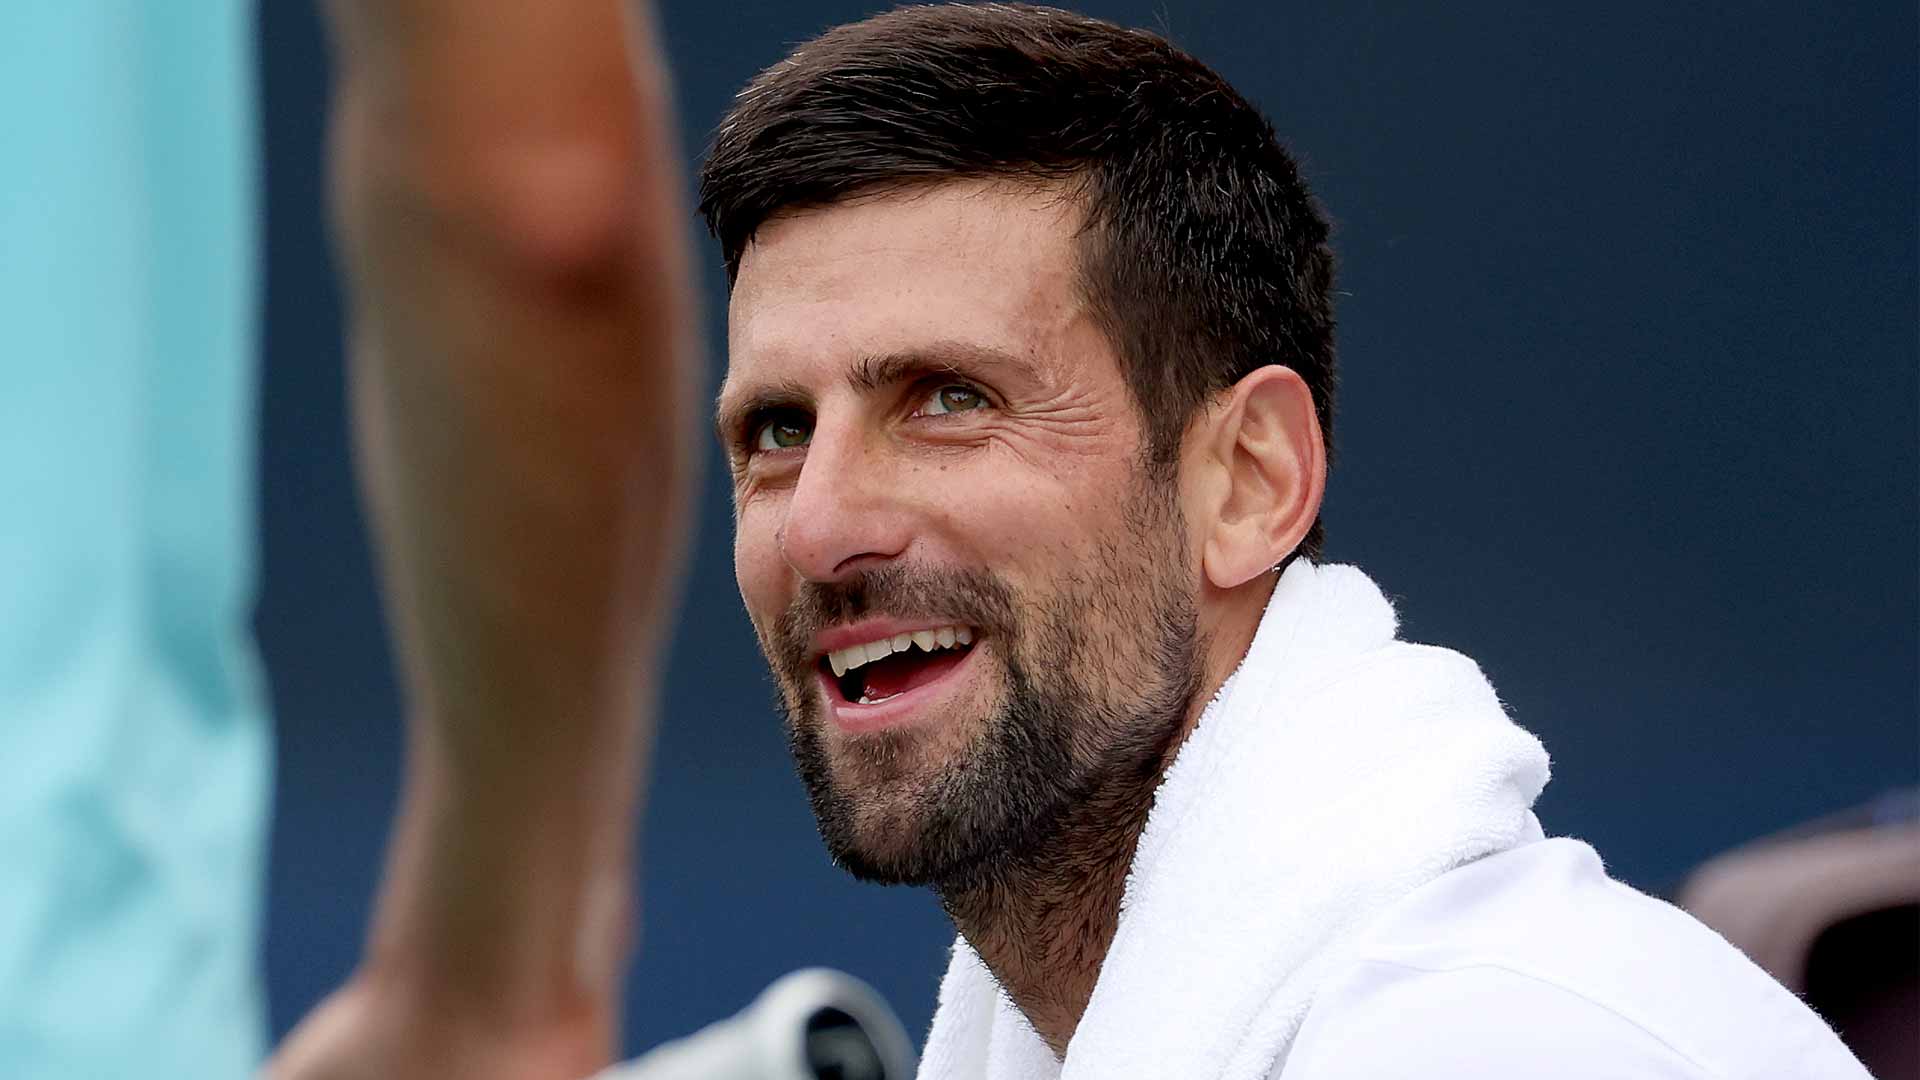 Novak Djokovic is ready to pursue his fourth US Open title.